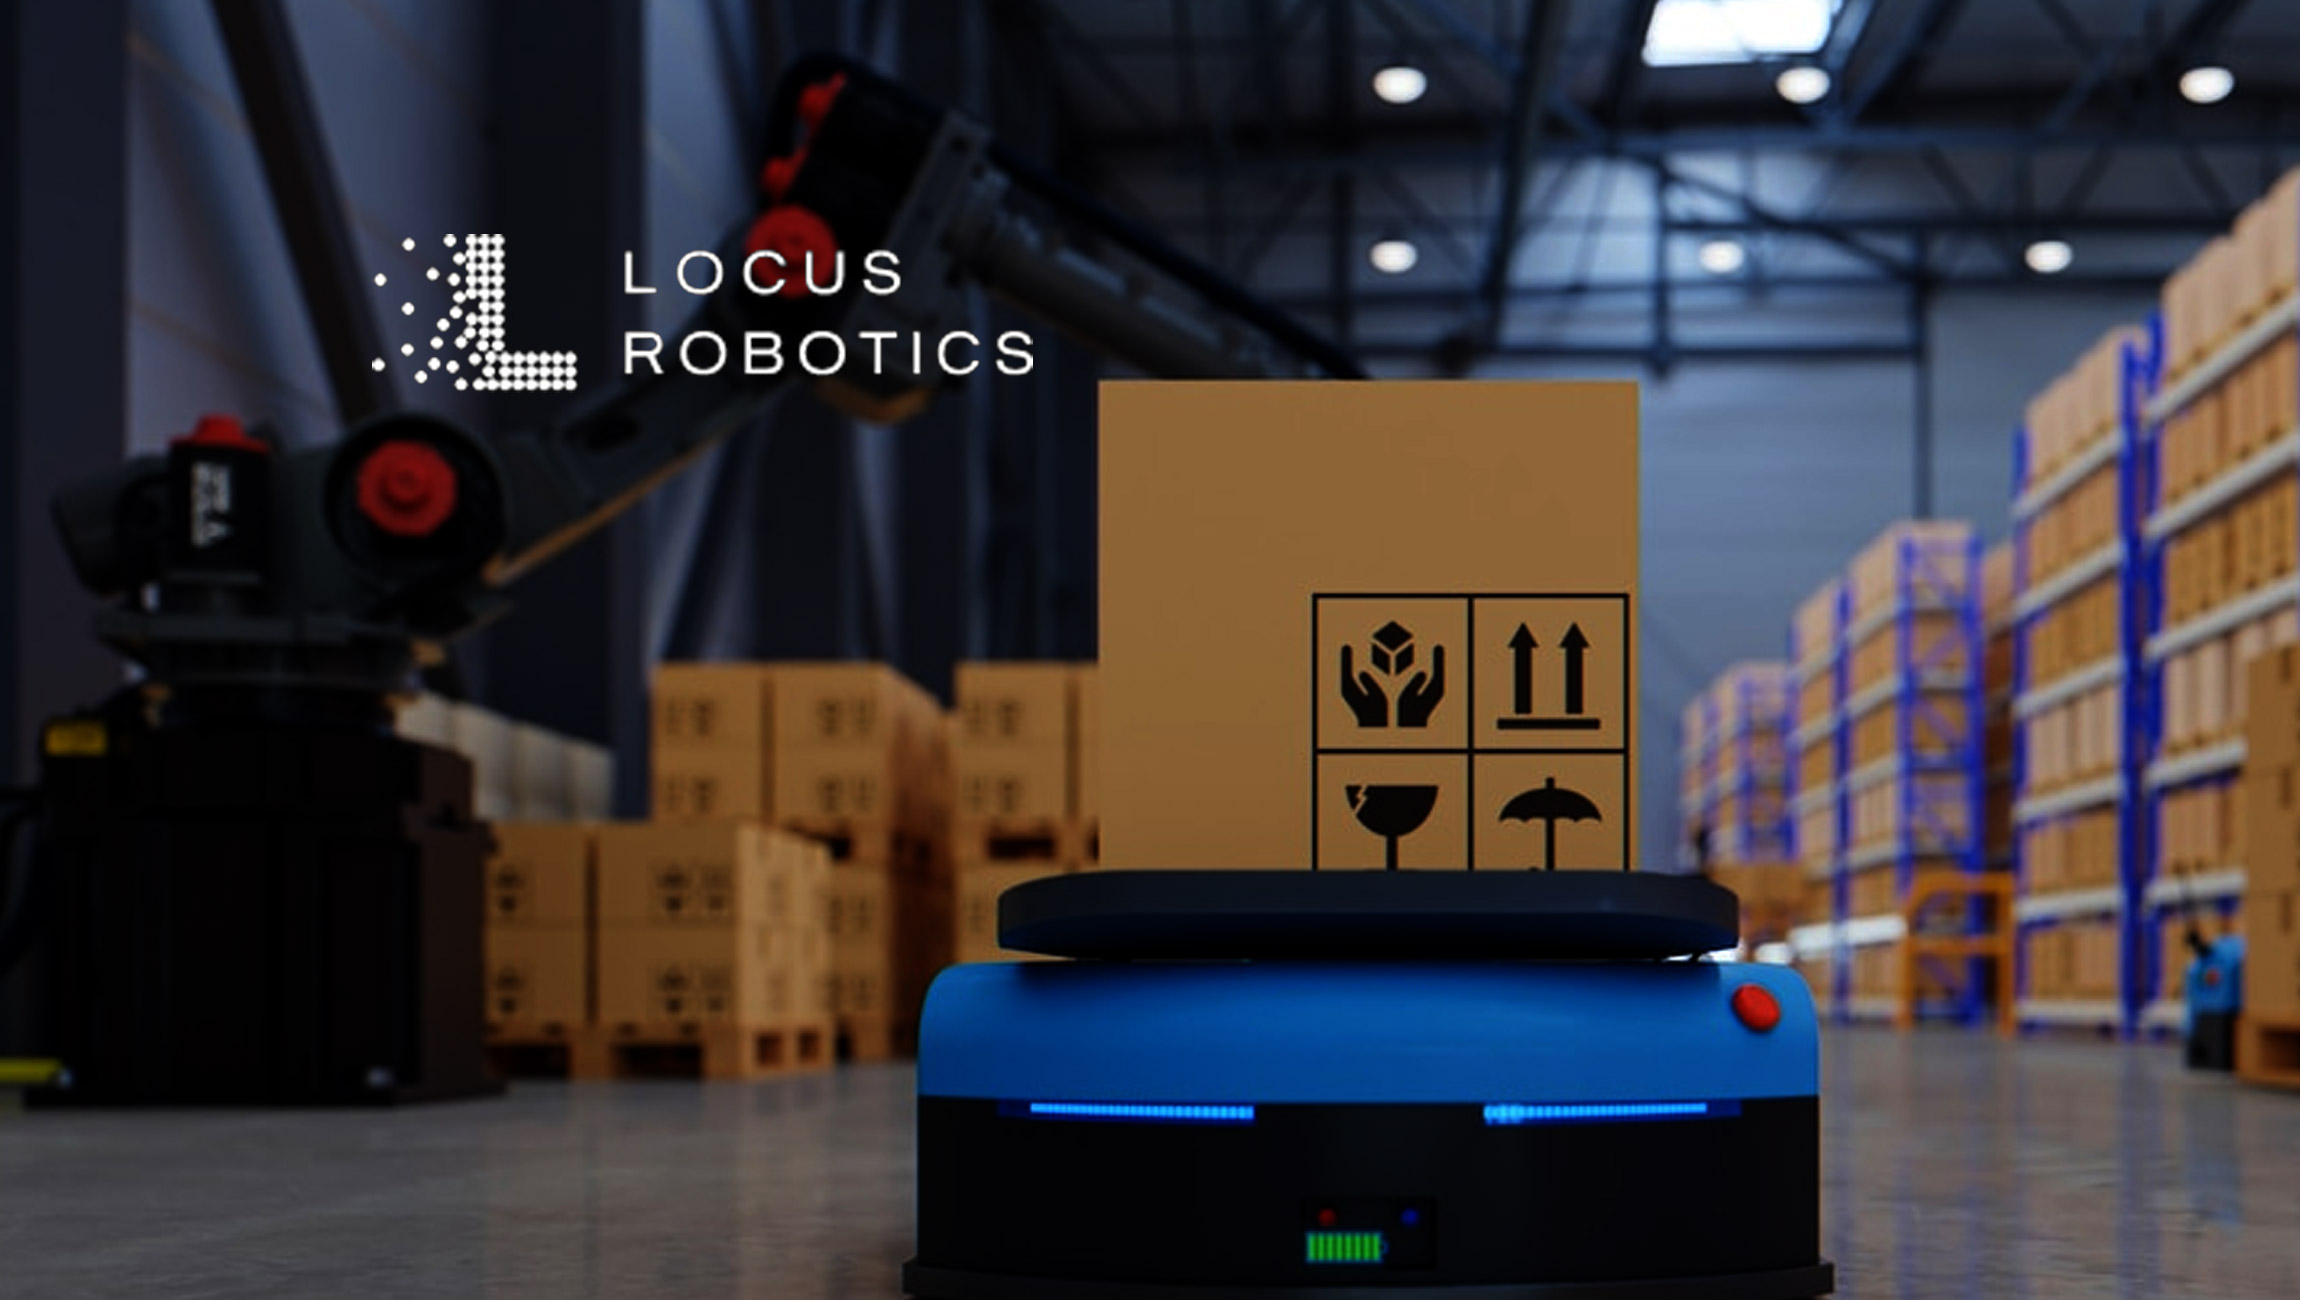 DHL Supply Chain Expands Partnership With Locus Robotics, Deploying High-Productivity Robotics Automation at Two New Warehouse Sites